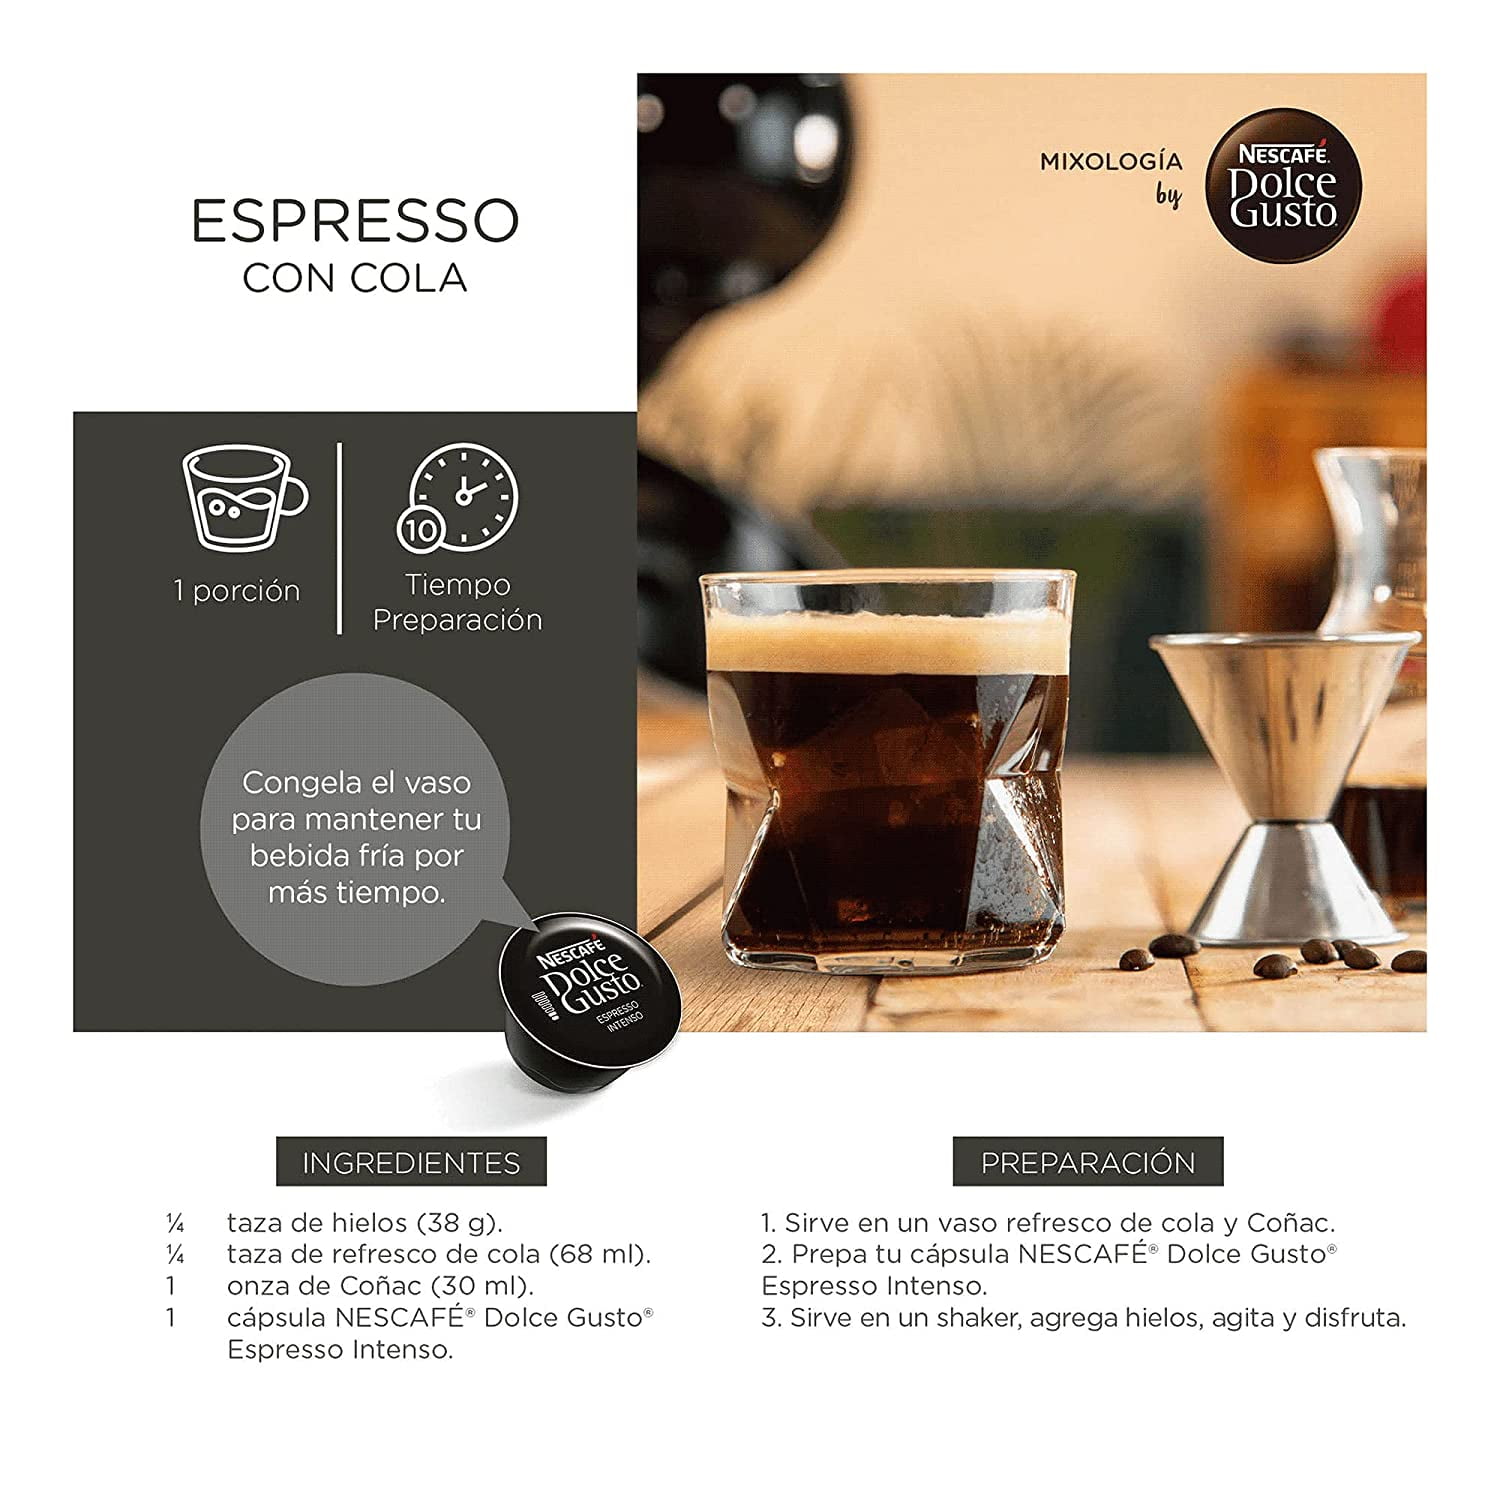 Nescafe Dolce Gusto Coffee Pods, Espresso Intenso, 16 capsules, Pack of 3 